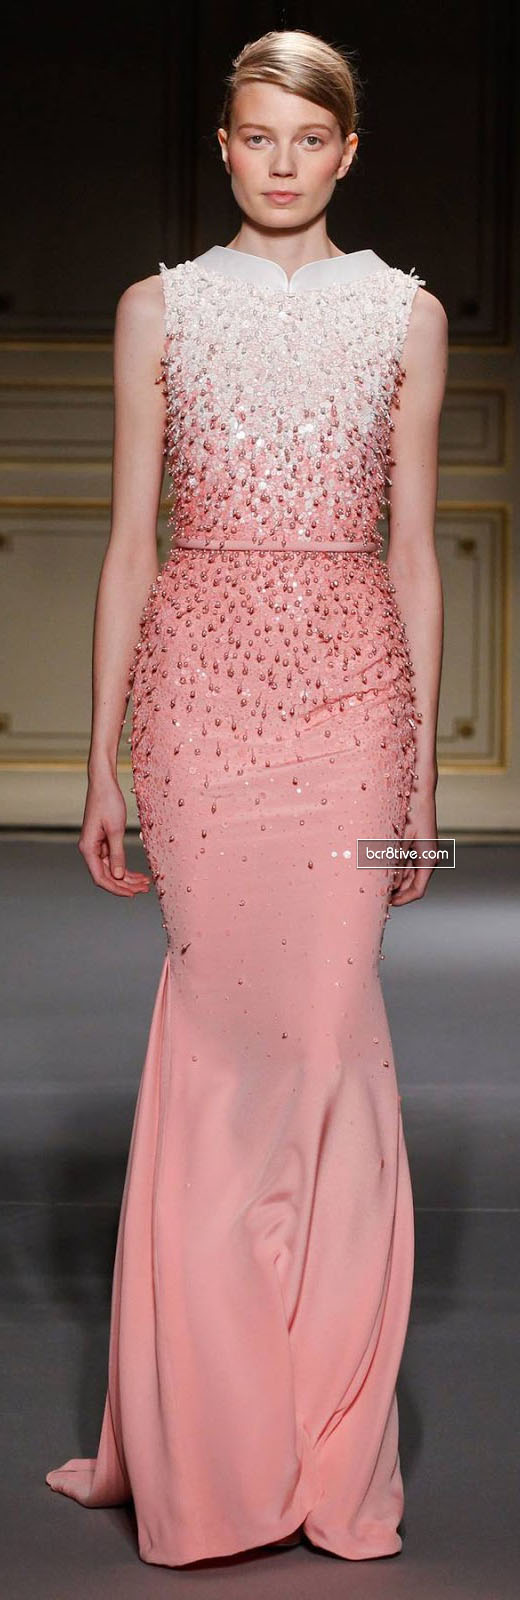 Georges Hobeika Couture Collection Spring 2013